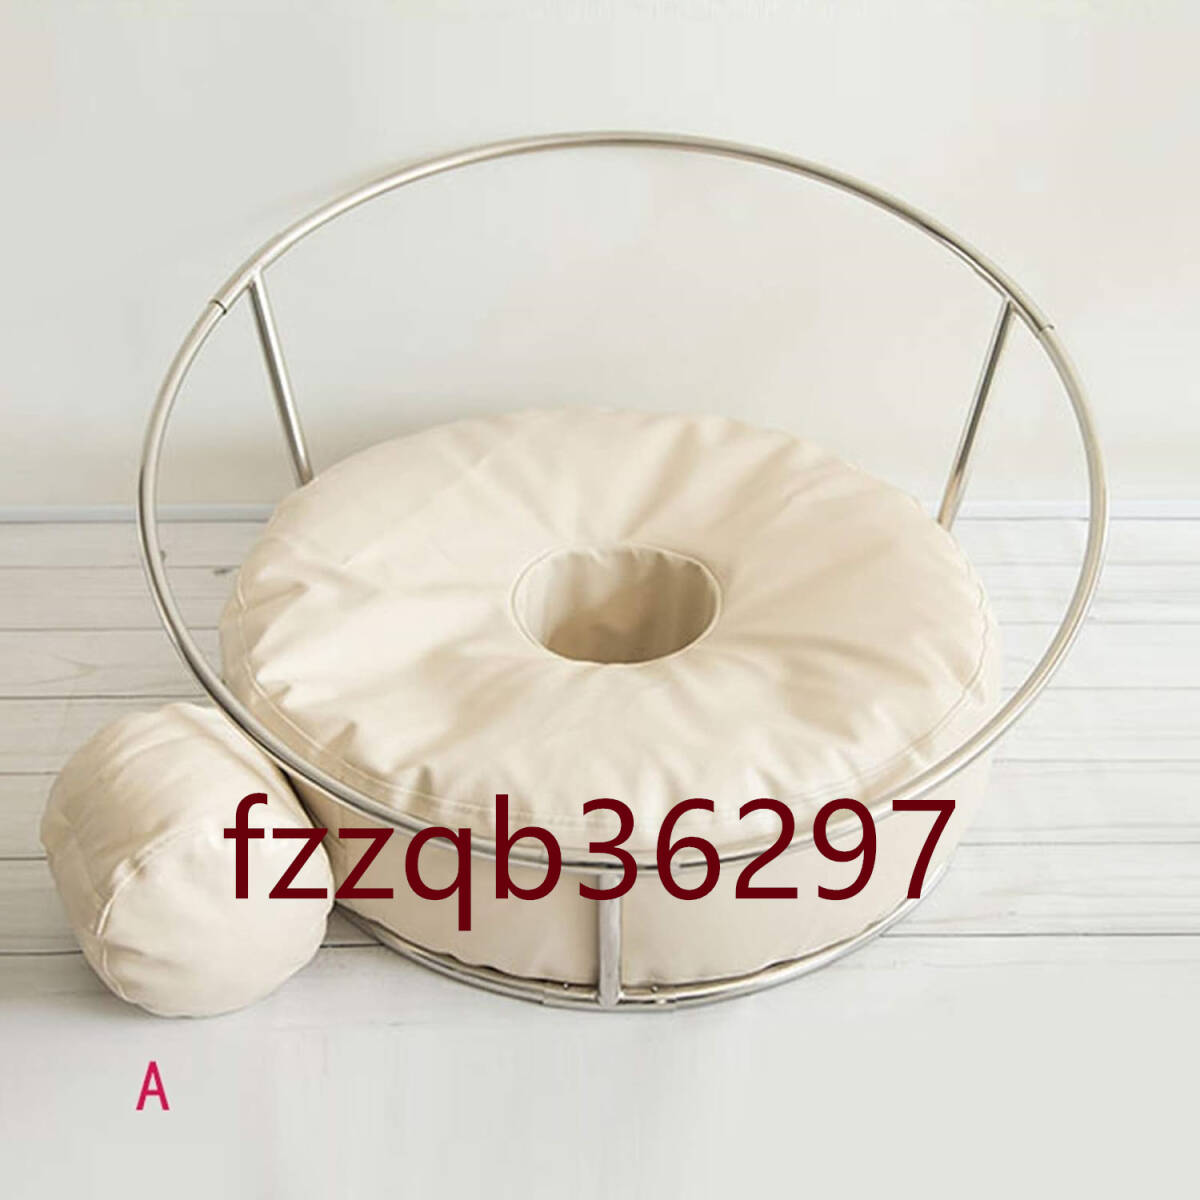  newborn baby photographing tool set Studio bean cushion bean bag photo round multifunction photographing pcs backpack frame removed possibility 